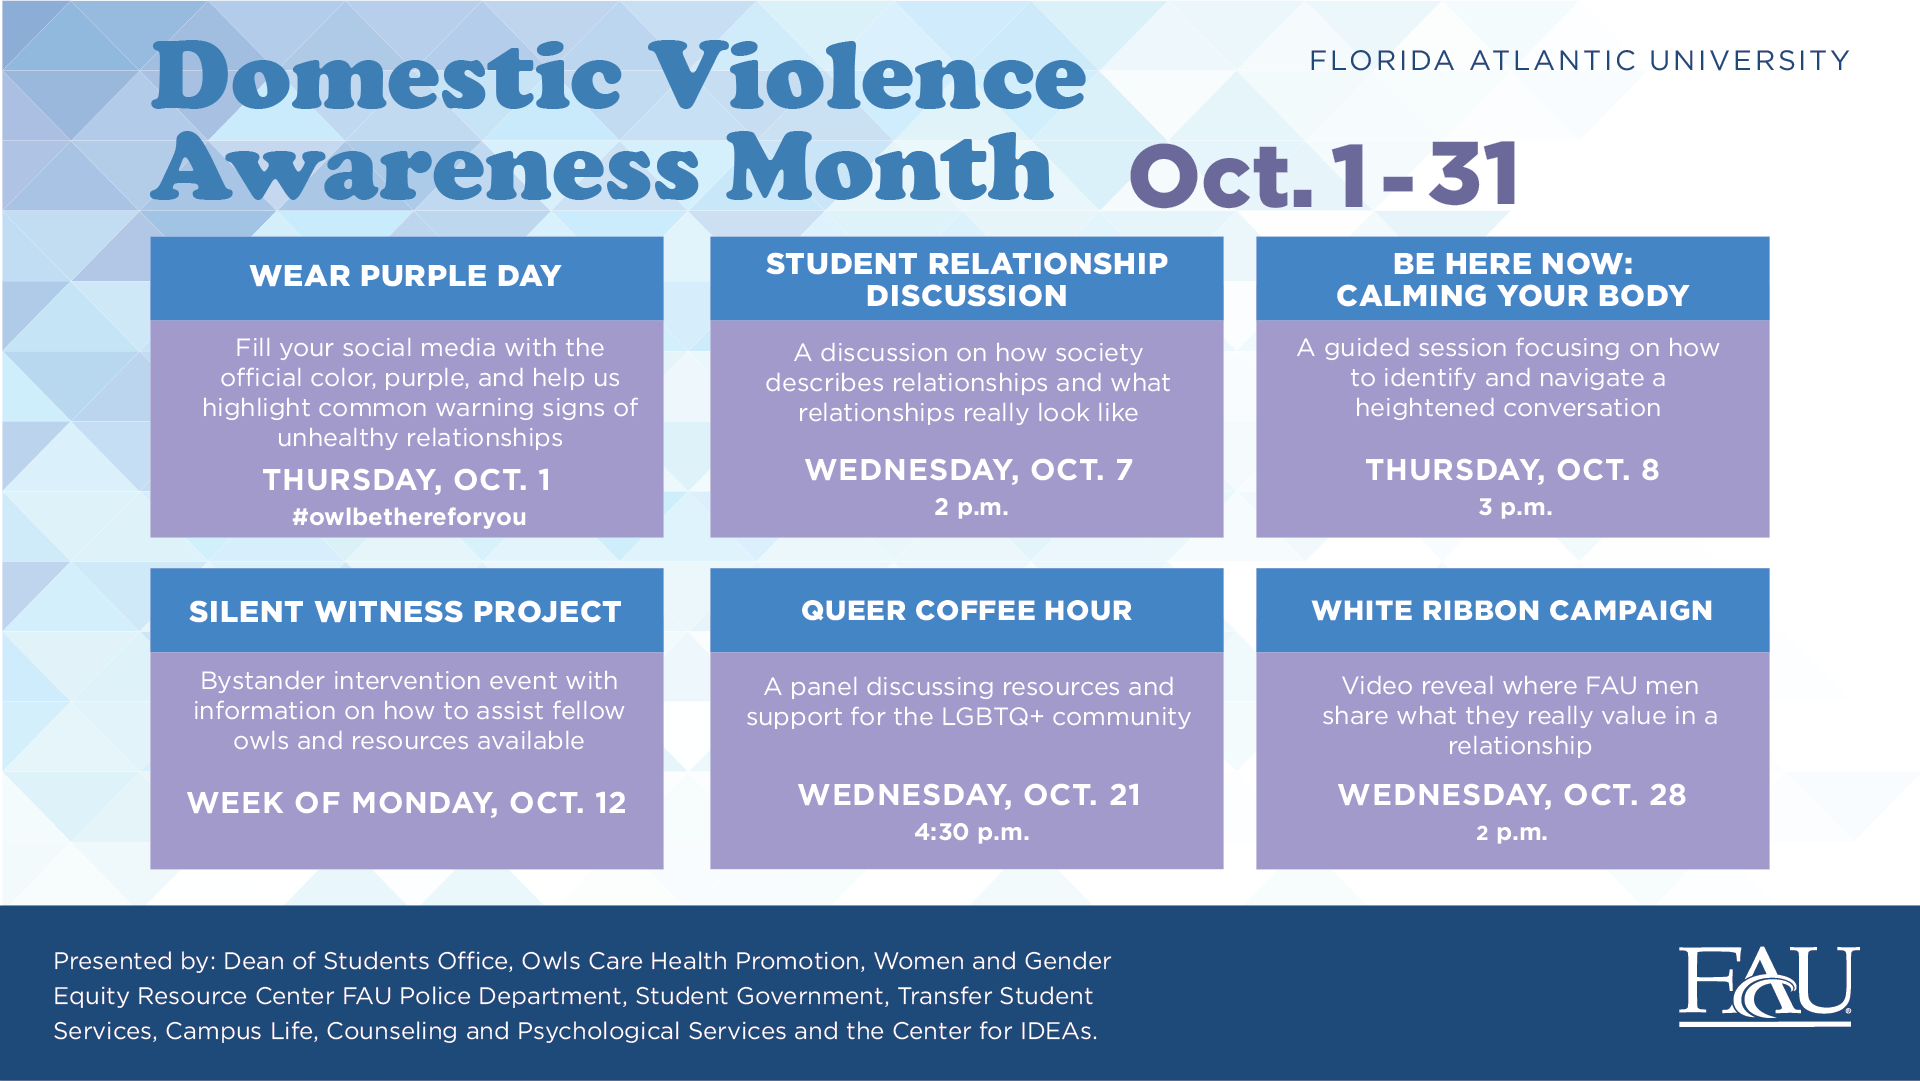 Domestic Violence event schedule